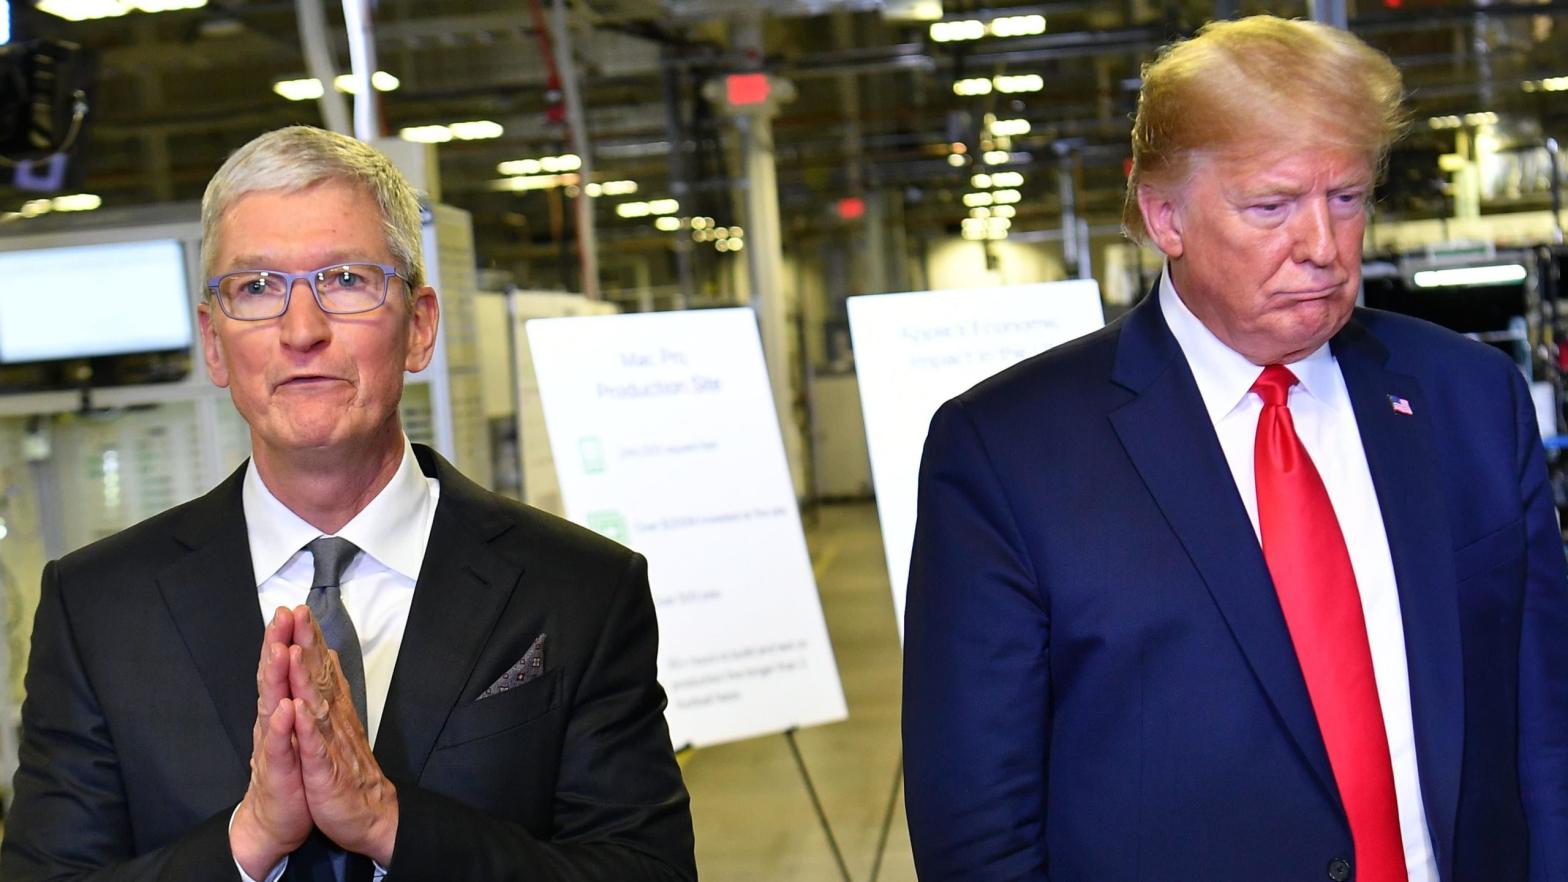 US President Donald Trump (R) and Apple CEO Tim Cook speak to the press during a tour of the Flextronics computer manufacturing facility where Apple's Mac Pros are assembled in Austin, Texas, on November 20, 2019.  (Photo: Mandel Ngan, Getty Images)